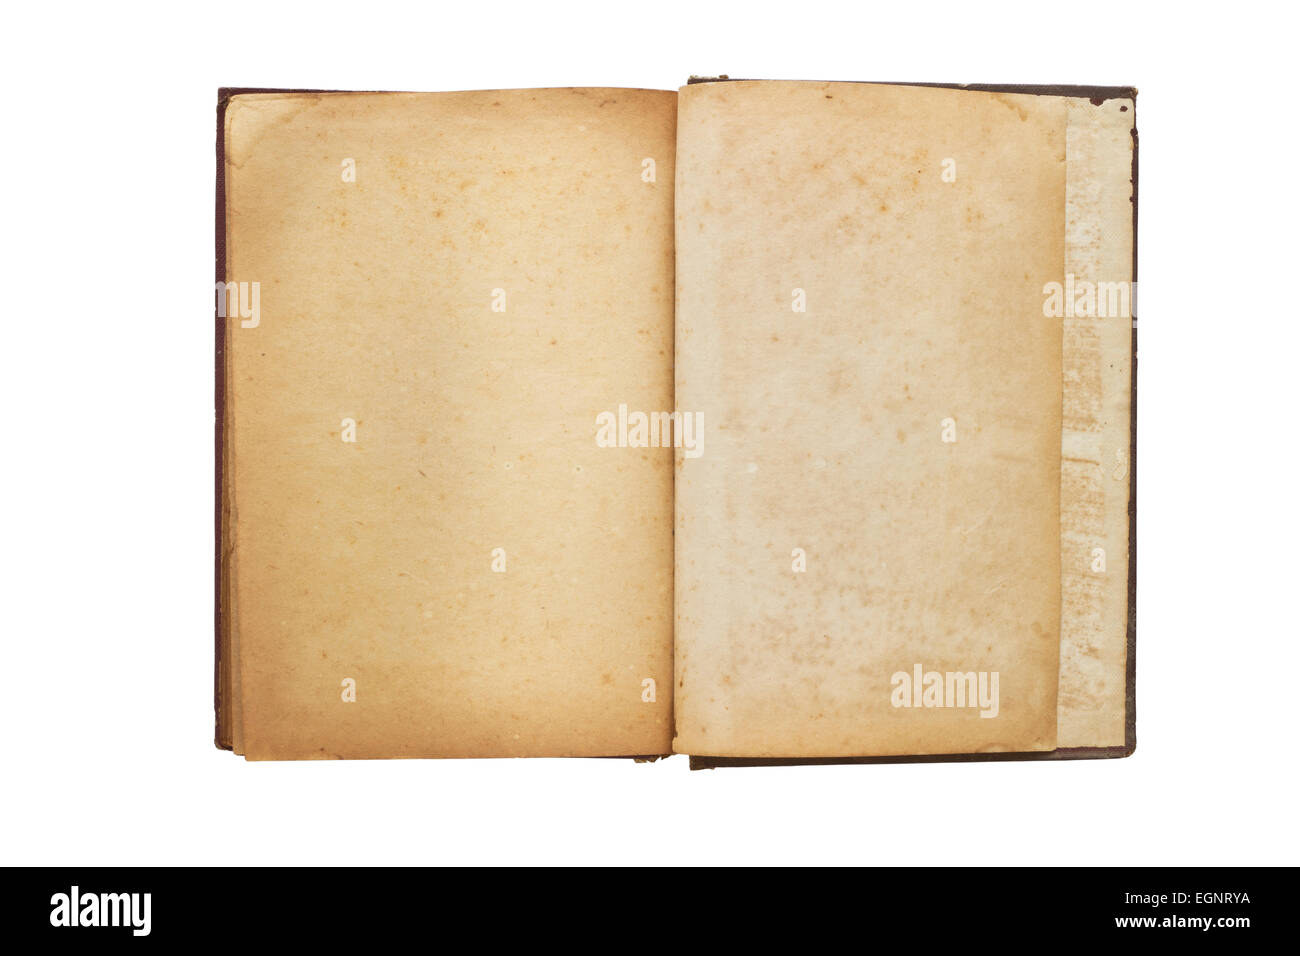 Old opened book with blank pages isolated over white background Stock Photo